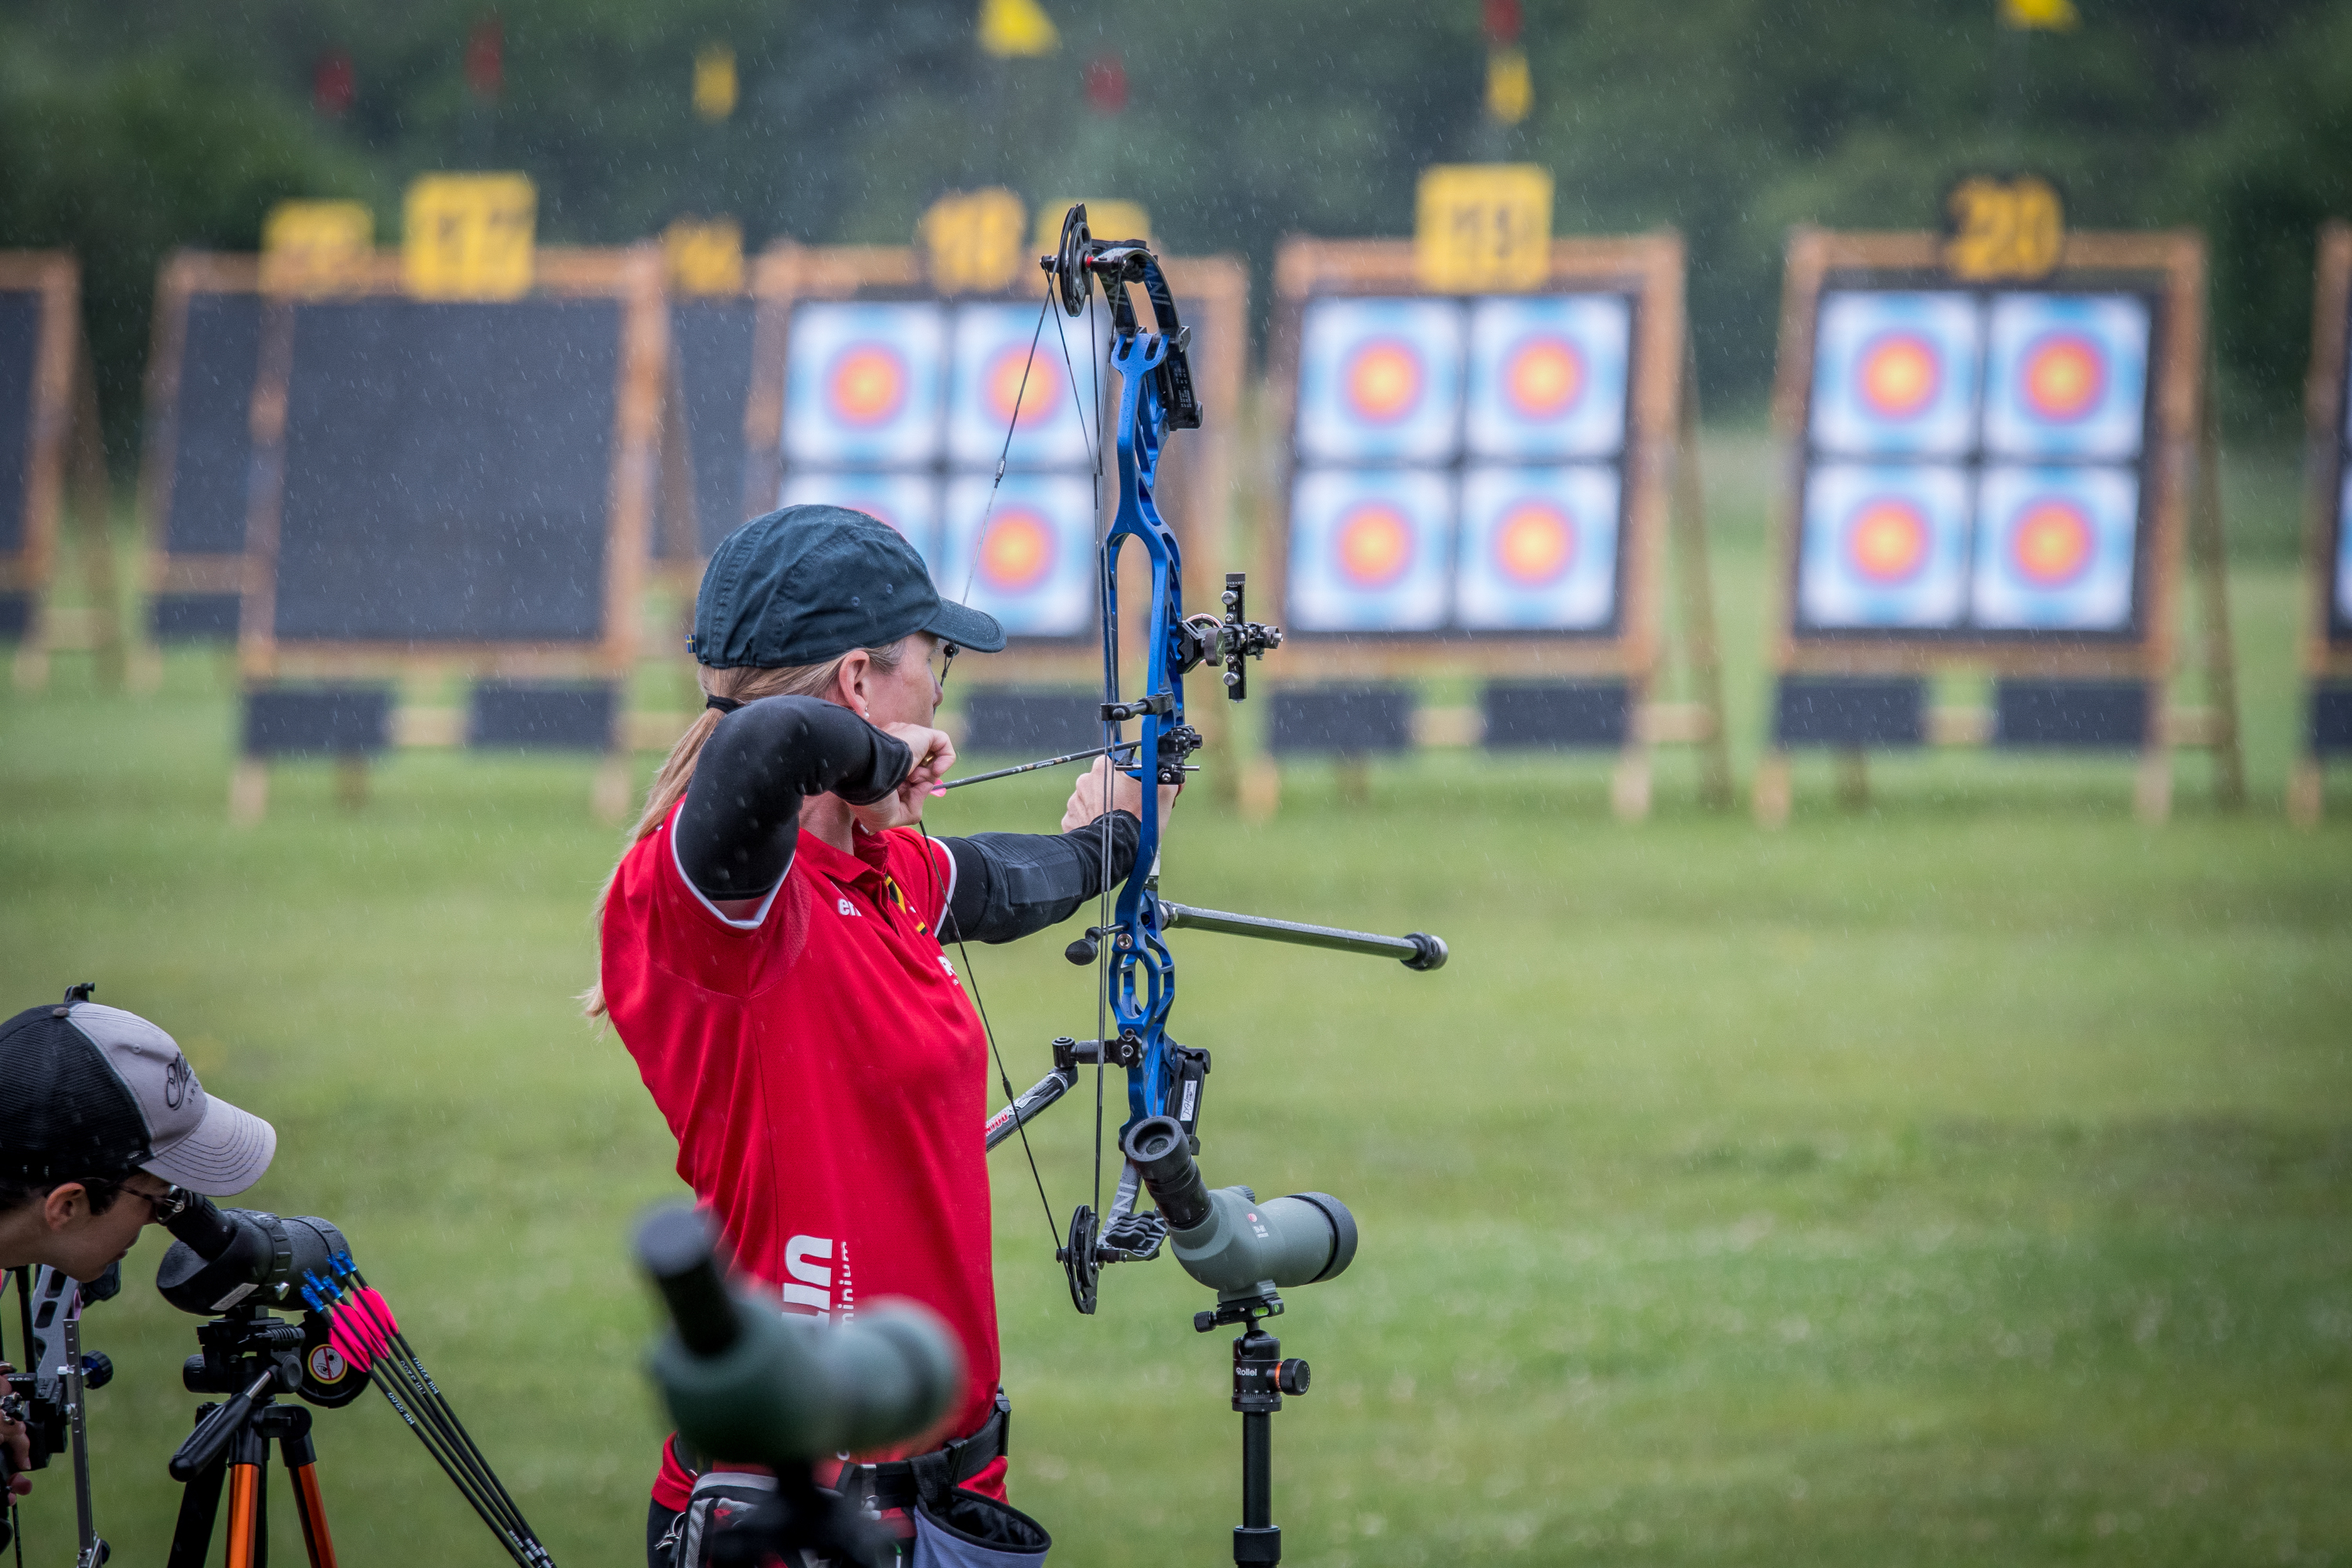 Archery – who will we see at the European Games?